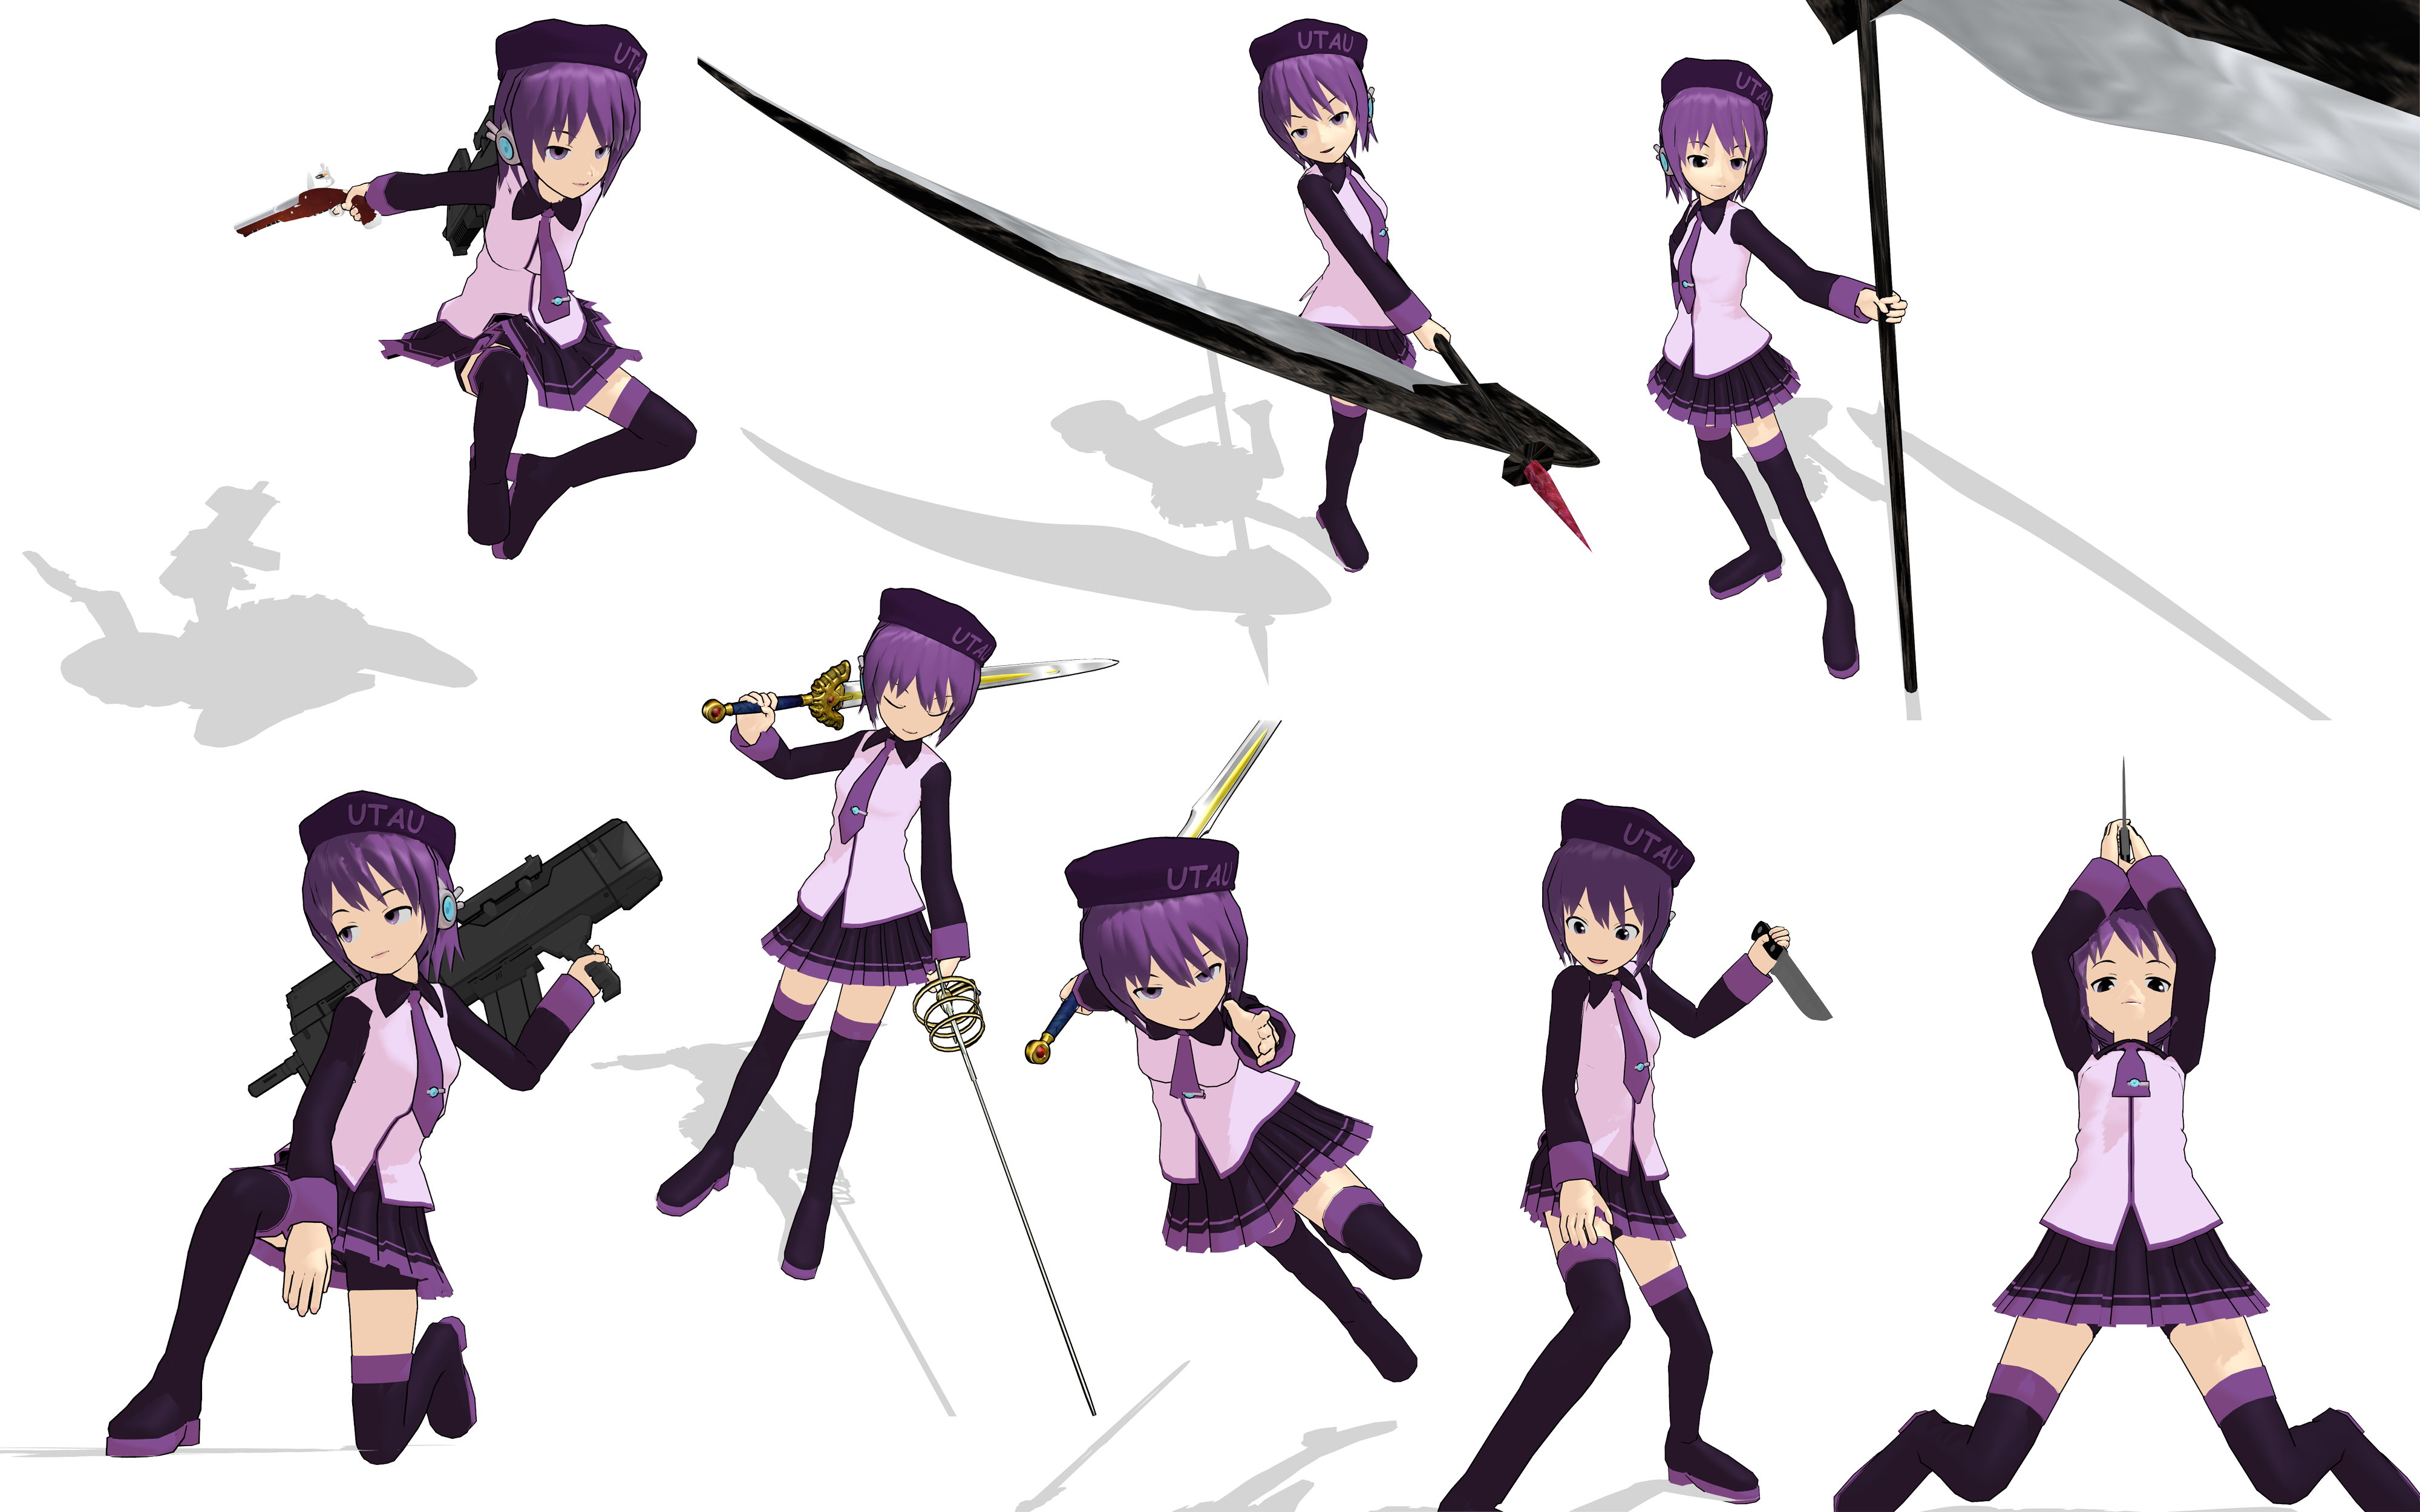 MMD Pose Pack: 8 Fighting Poses by AsparagusMMD on DeviantArt